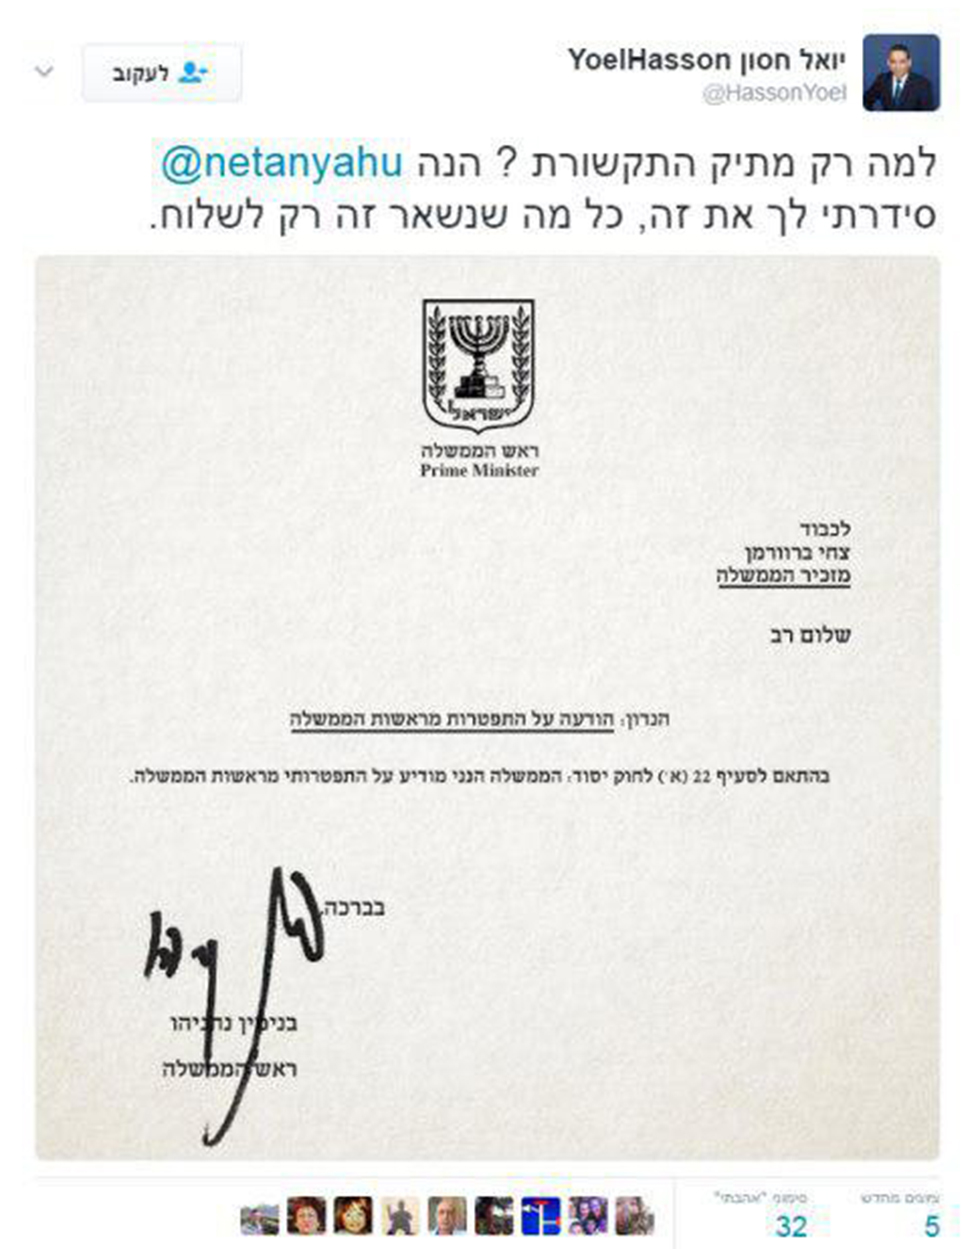 'Why just the ministry of communication? Here Netanyahu, I also made this for you, all that's left is to send it.'